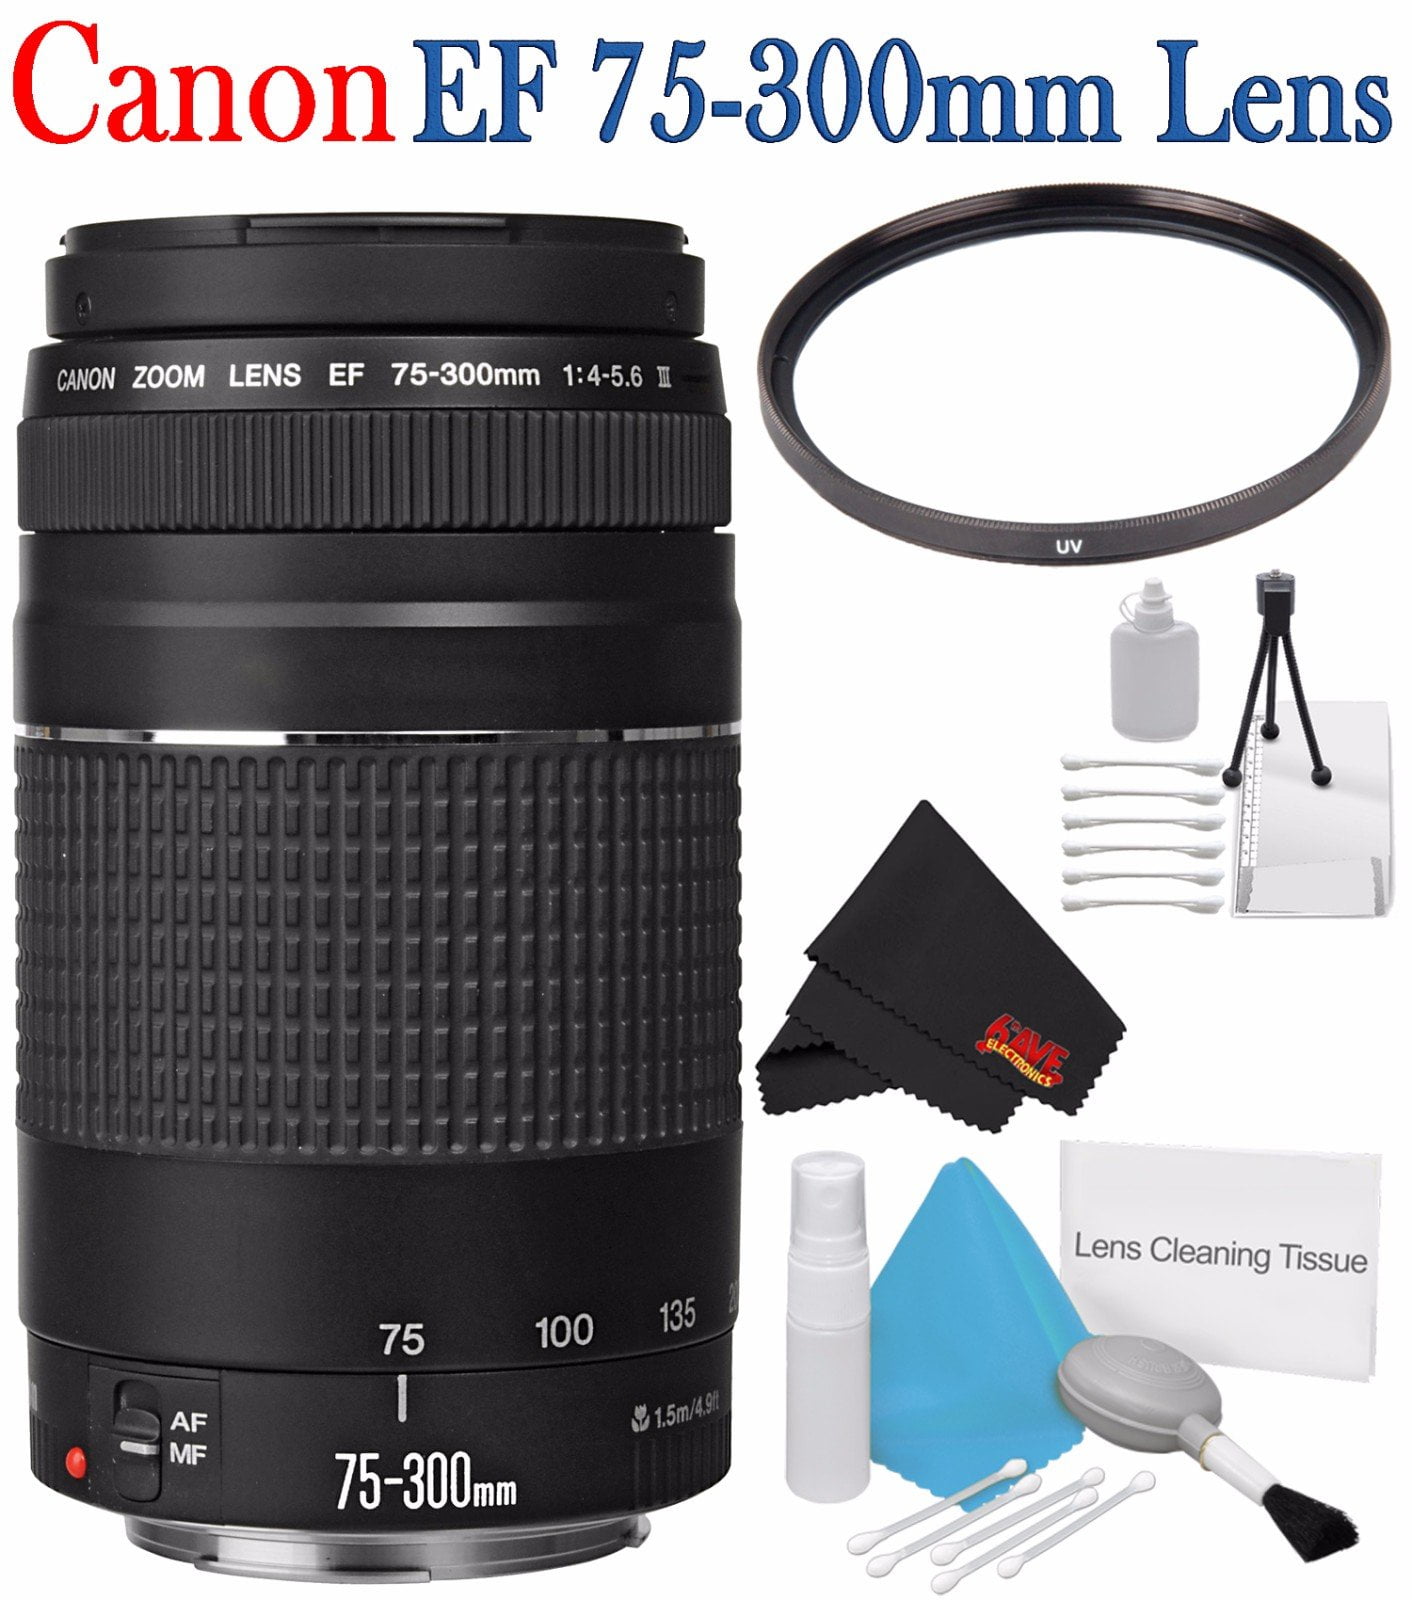 Large Test Chart for Canon EF 75-300mm f/4-5.6 III Lens 